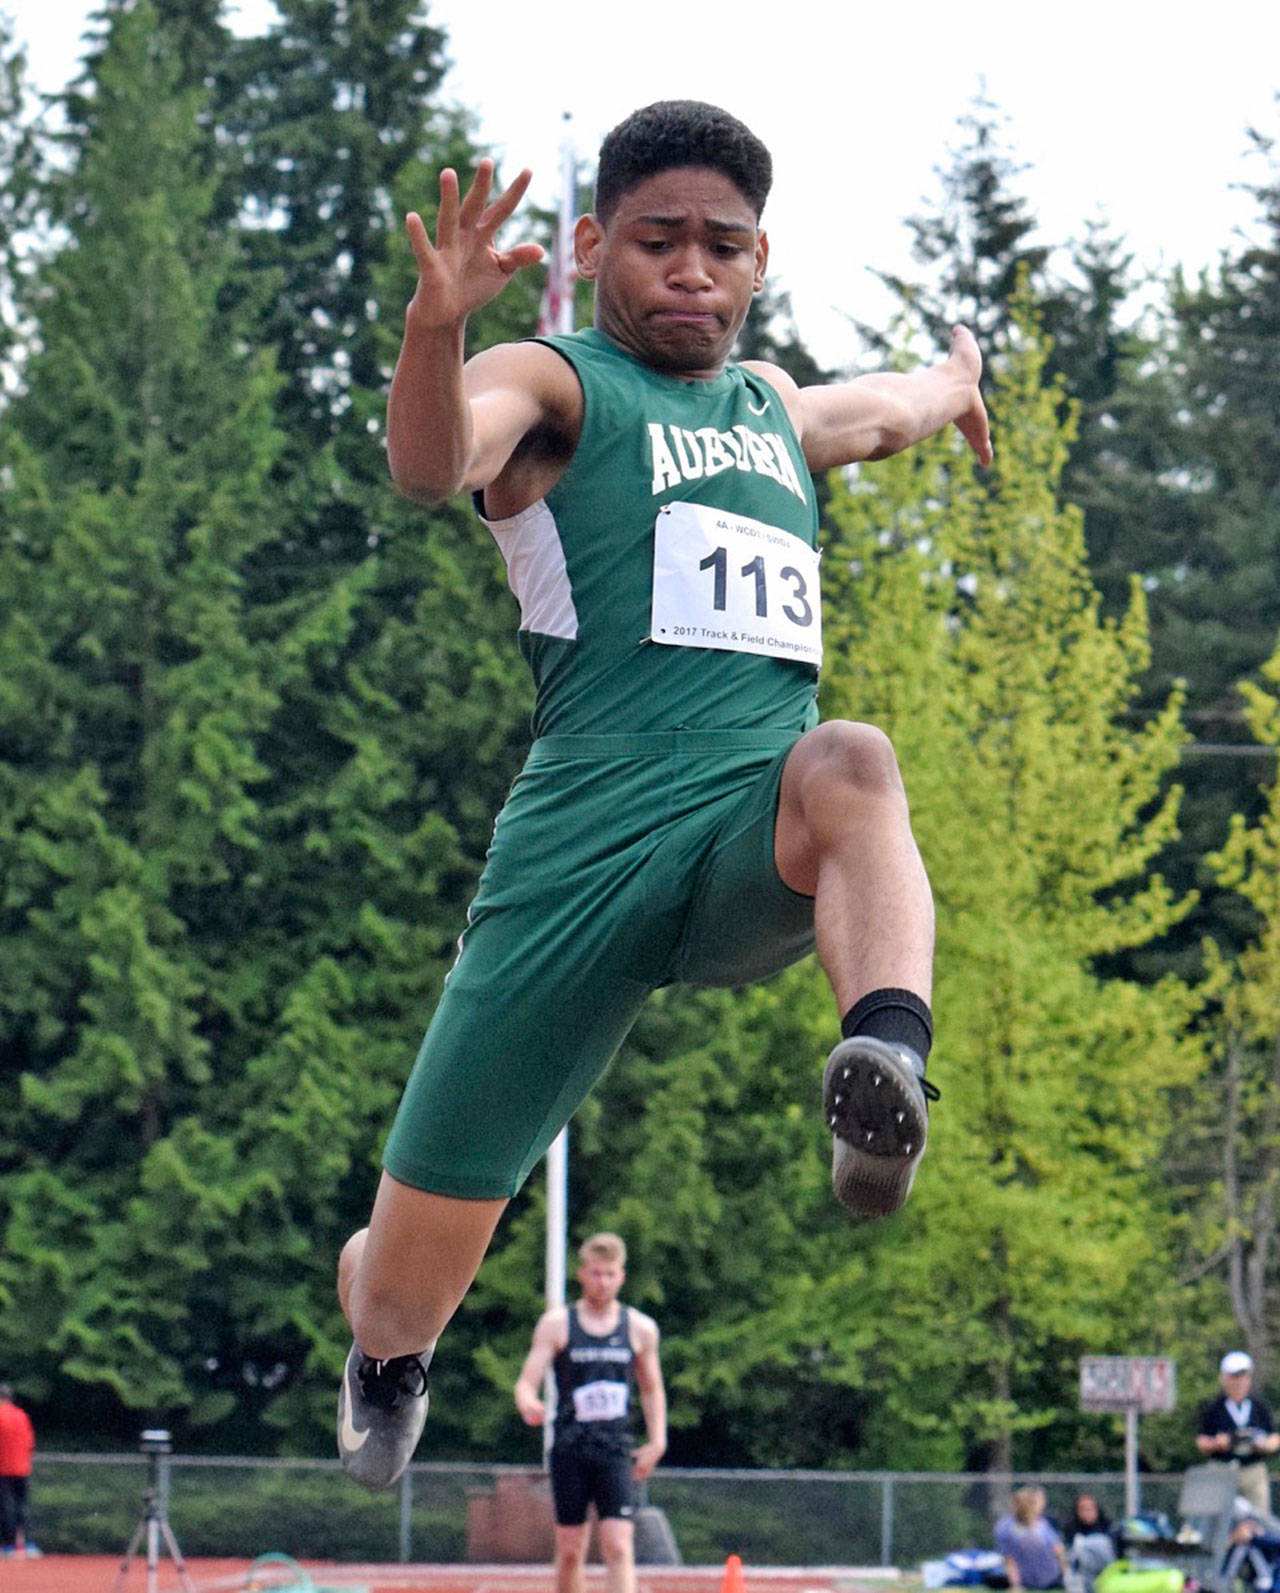 Auburn’s D’Angelo Washington soars in taking the district long jump title with a leap of 22 feet, 7 inches on Thursday at French Field. RACHEL CIAMPI, Auburn Reporter